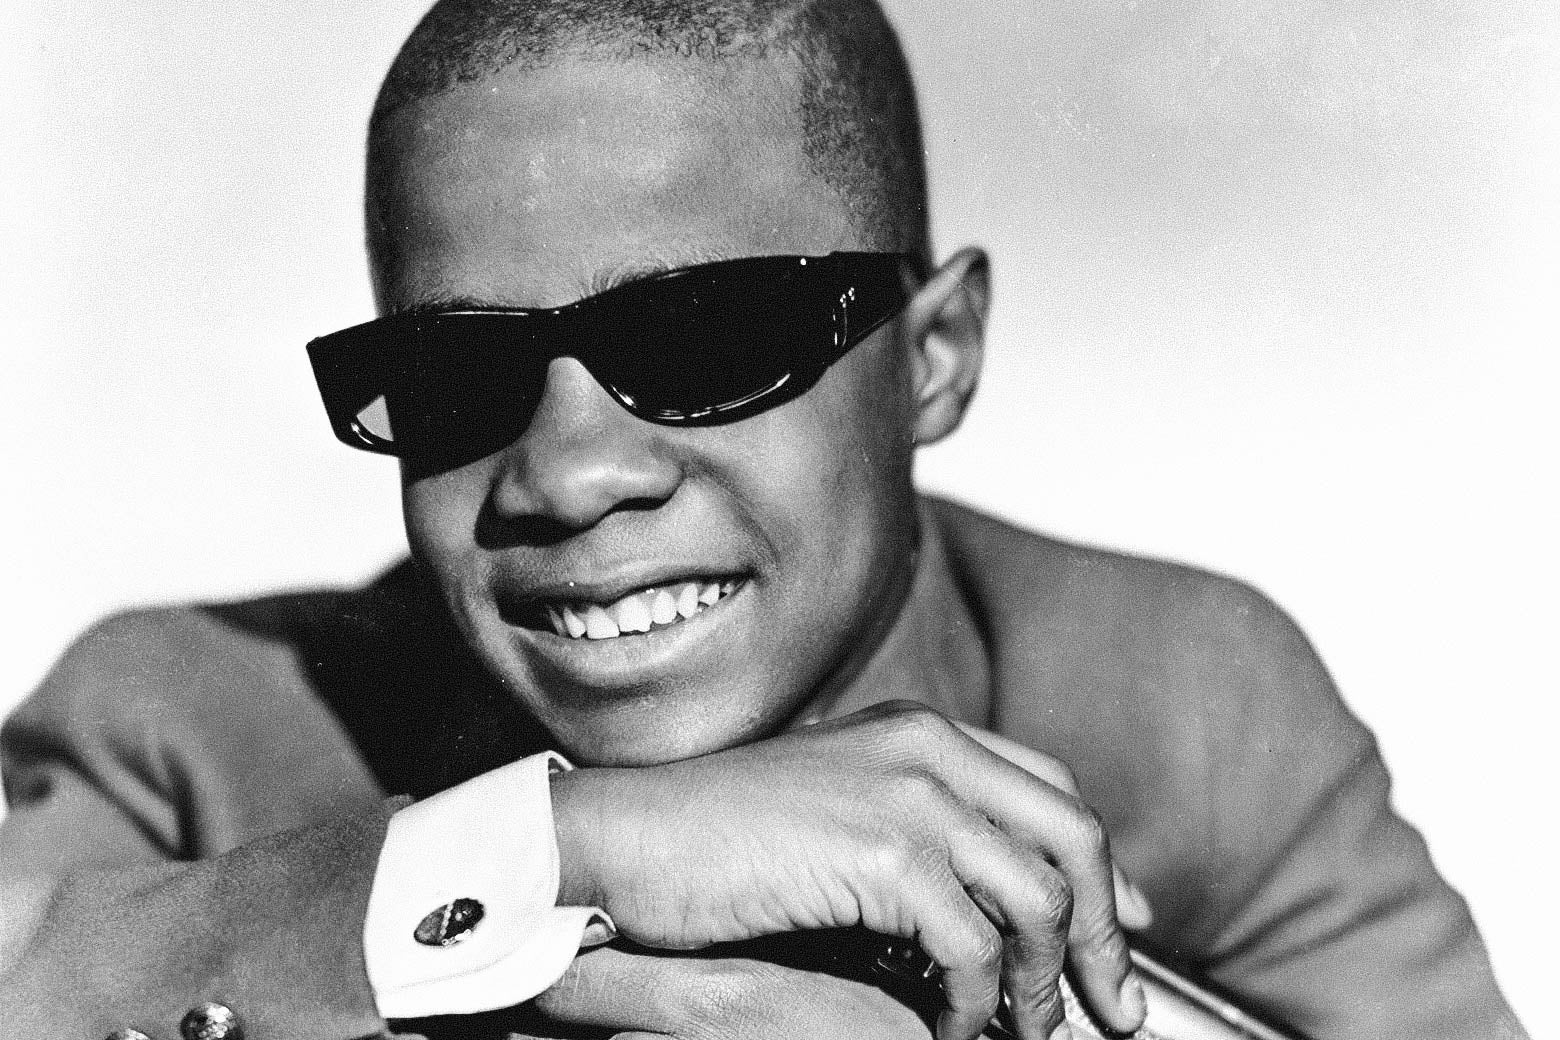 Stevie Wonder’s first No. 1 hit was his least likely and most forgotten.